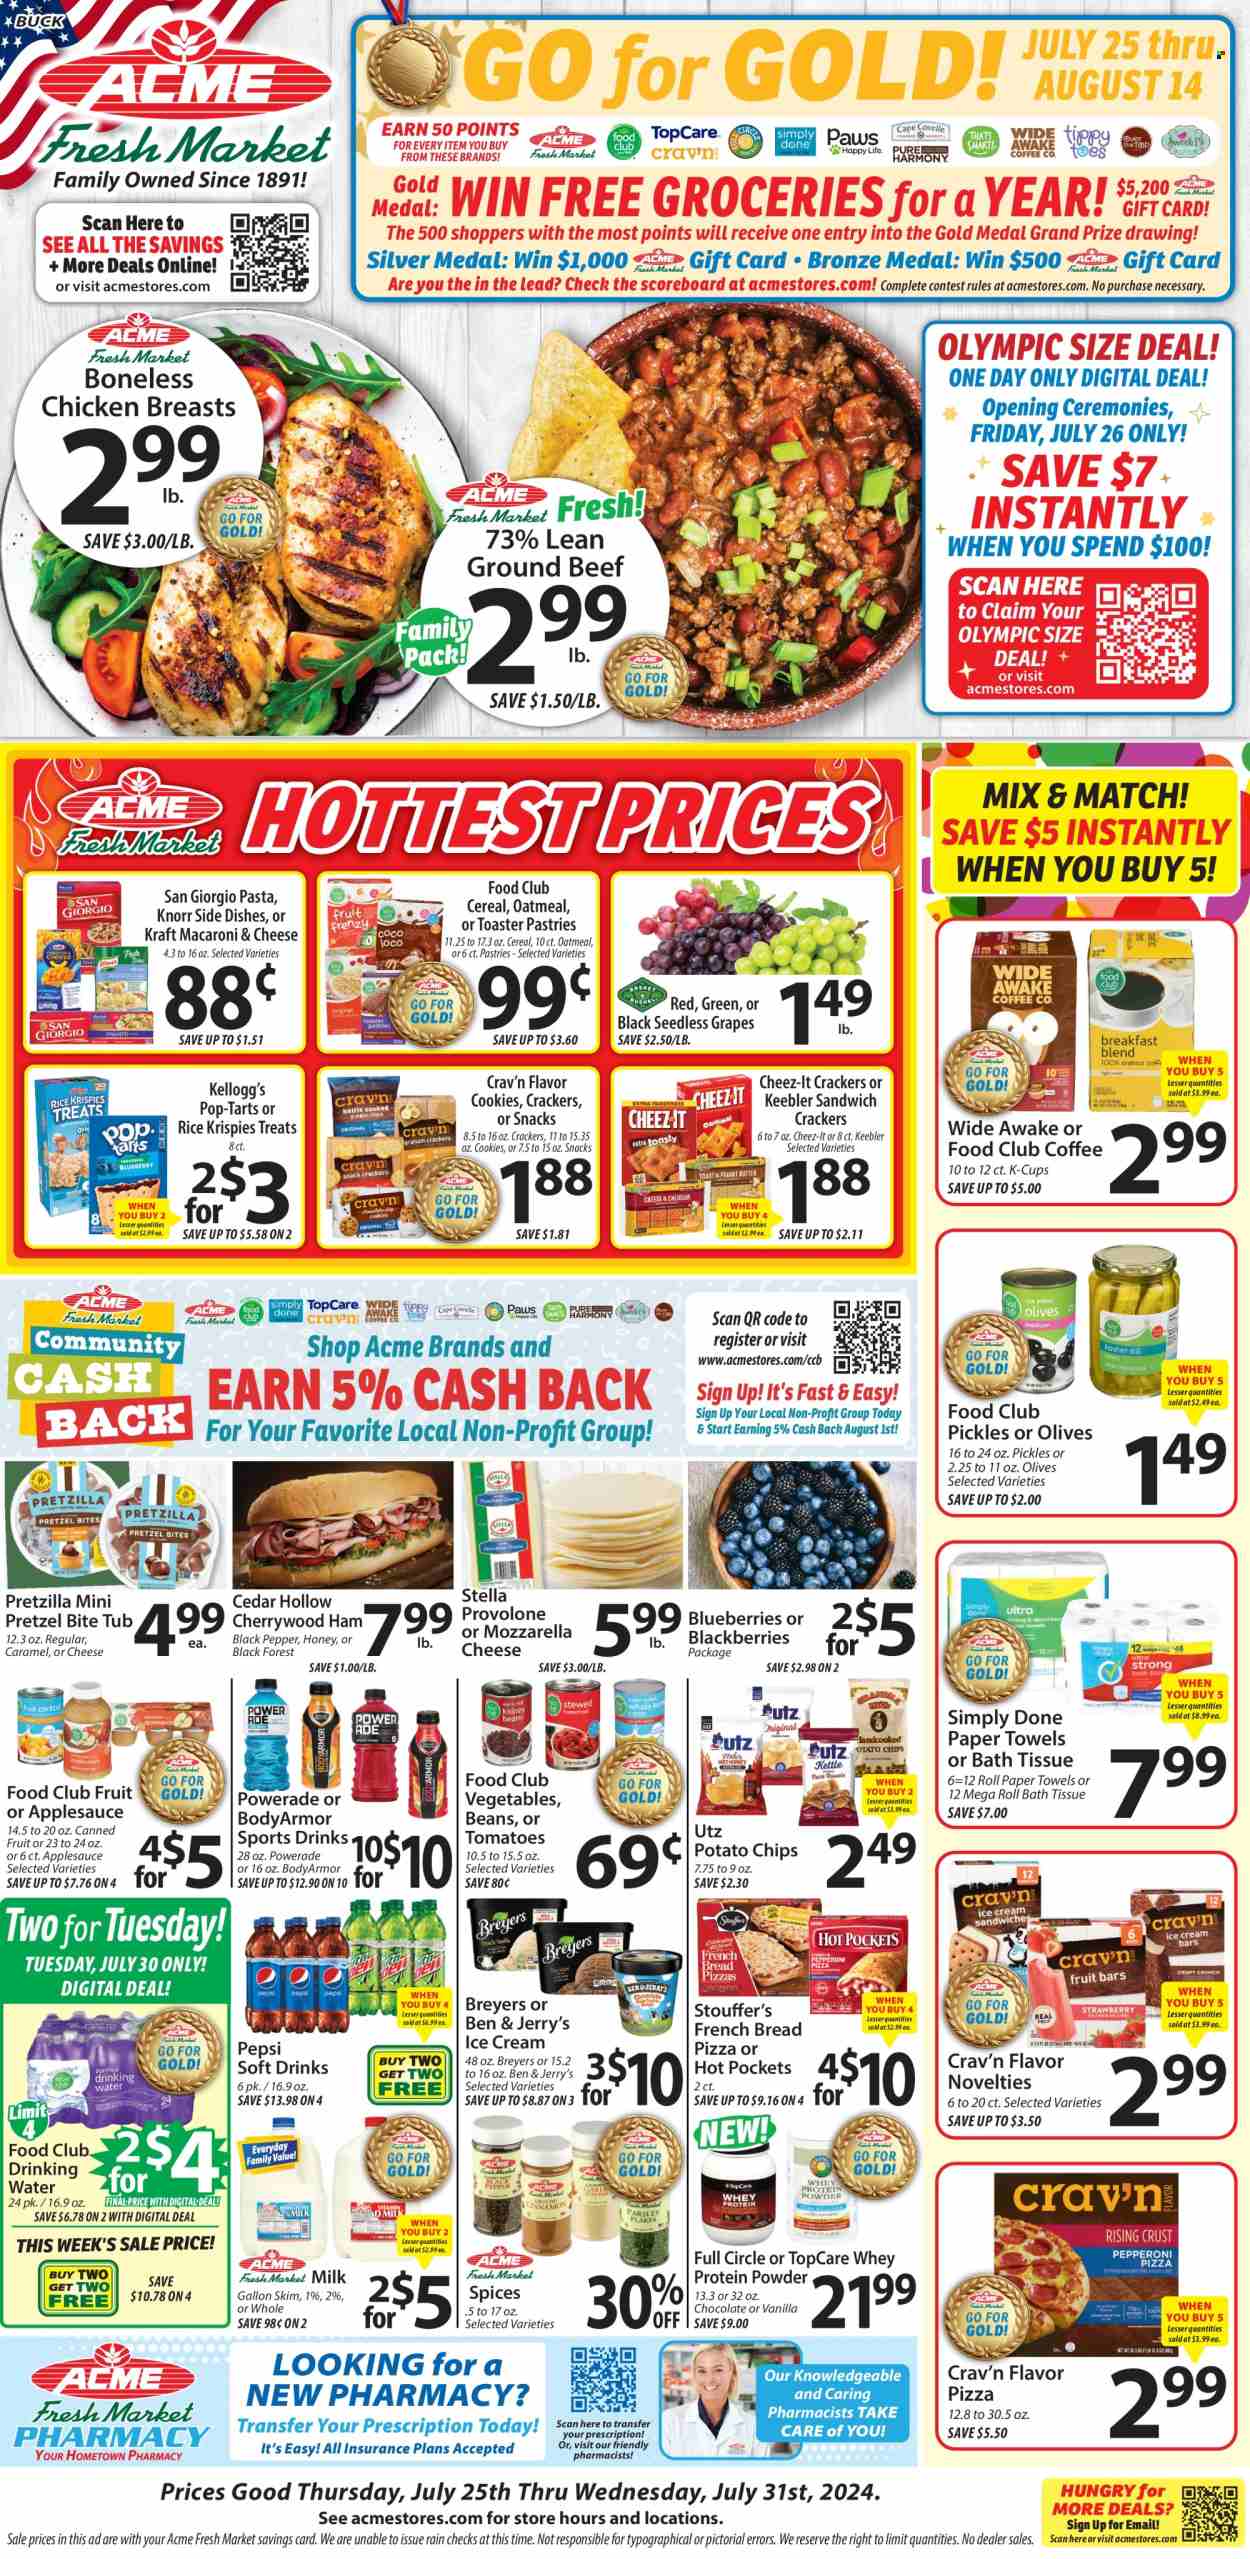 thumbnail - ACME Flyer - 07/25/2024 - 07/31/2024 - Sales products - pretzels, pastries, blackberries, grapes, seedless grapes, mac and cheese, hot pocket, pizza, pasta, Knorr, Kraft®, ready meal, chicken breasts, Provolone, snack bar, milk, ice cream, Ben & Jerry's, frozen vegetables, Stouffer's, crackers, Kellogg's, Pop-Tarts, Keebler, snack cake, potato chips, Cheez-It, salty snack, oatmeal, pickles, canned fruit, pickled vegetables, cereals, Rice Krispies, black pepper, spice, sauce, apple sauce, honey, Powerade, Pepsi, energy drink, soft drink, electrolyte drink, water, carbonated soft drink, coffee capsules, K-Cups, chicken, beef meat, ground beef, bath tissue, kitchen towels, paper towels, whey protein. Page 1.